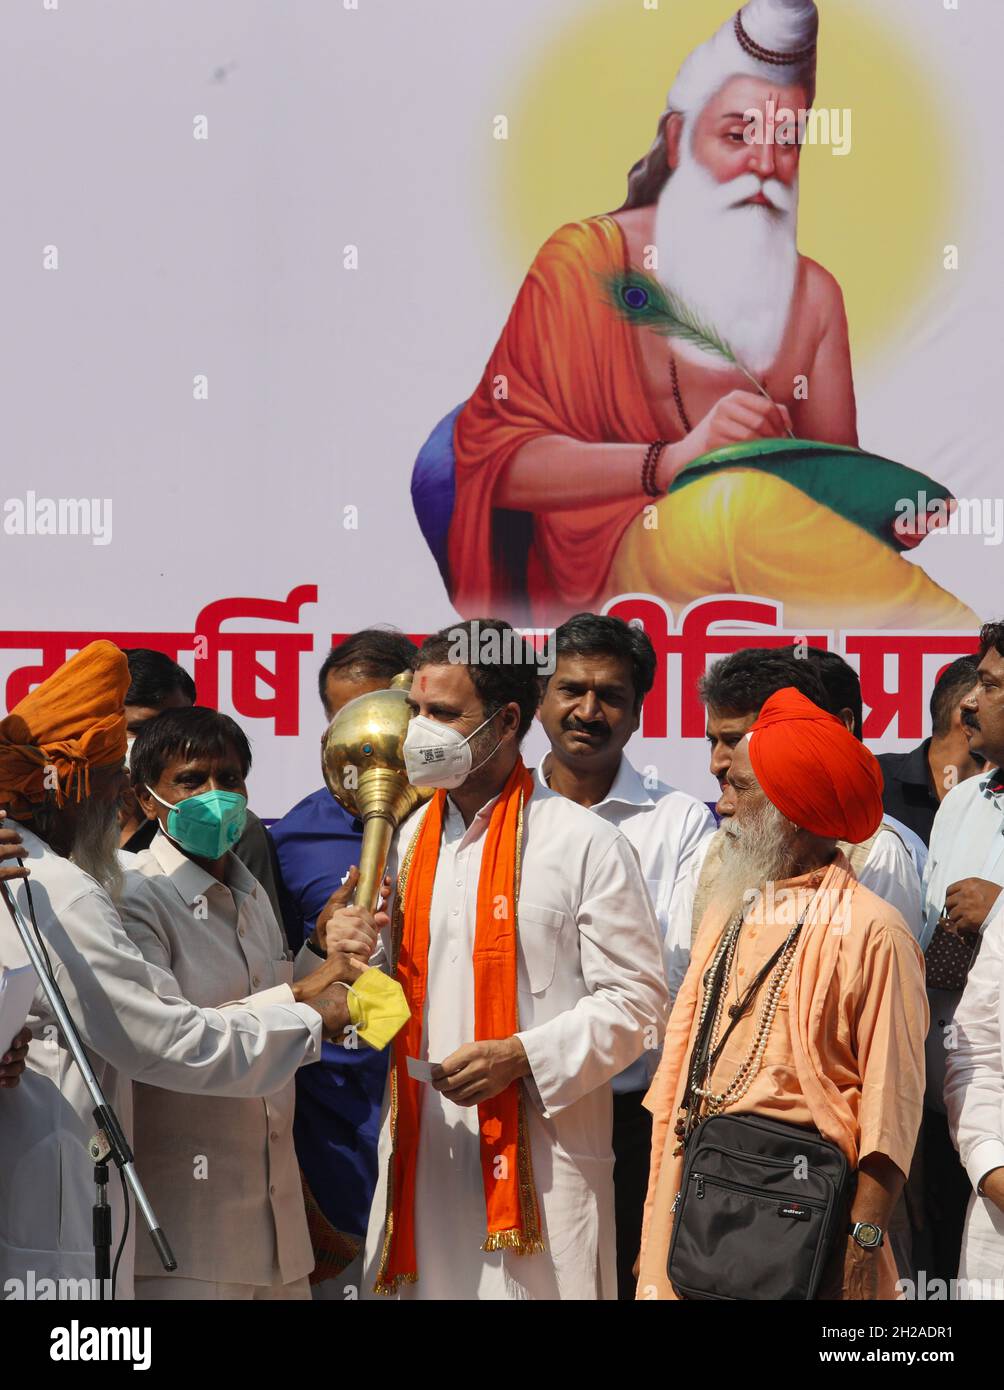 New Delhi, India. 20th Oct, 2021. Congress leader Rahul Gandhi felicitated during the flag-off ceremony of Shobha Yatra on the occasion of Maharishi Valmiki Jayanti, at All India Congress Committee headquarter. Valmiki Jayanti, is an annual Indian festival celebrated in particular by the Balmiki religious group, to commemorate the birth of the ancient Indian poet and philosopher Valmiki. (Photo by Naveen Sharma/SOPA Images/Sipa USA) Credit: Sipa USA/Alamy Live News Stock Photo